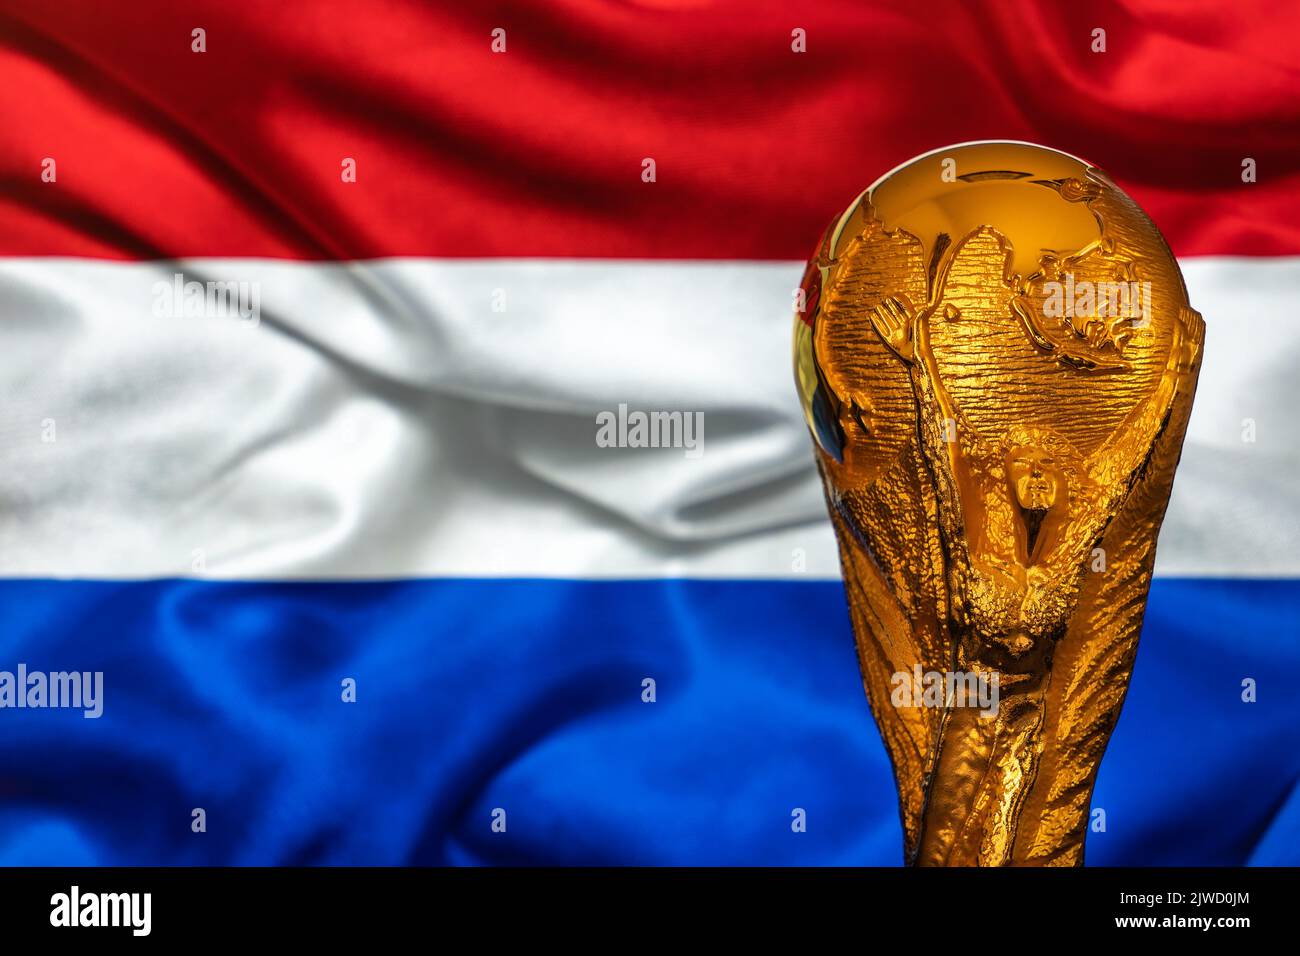 Doha, Qatar - September 4, 2022: FIFA World Cup trophy against the background of Netherlands flag. Stock Photo